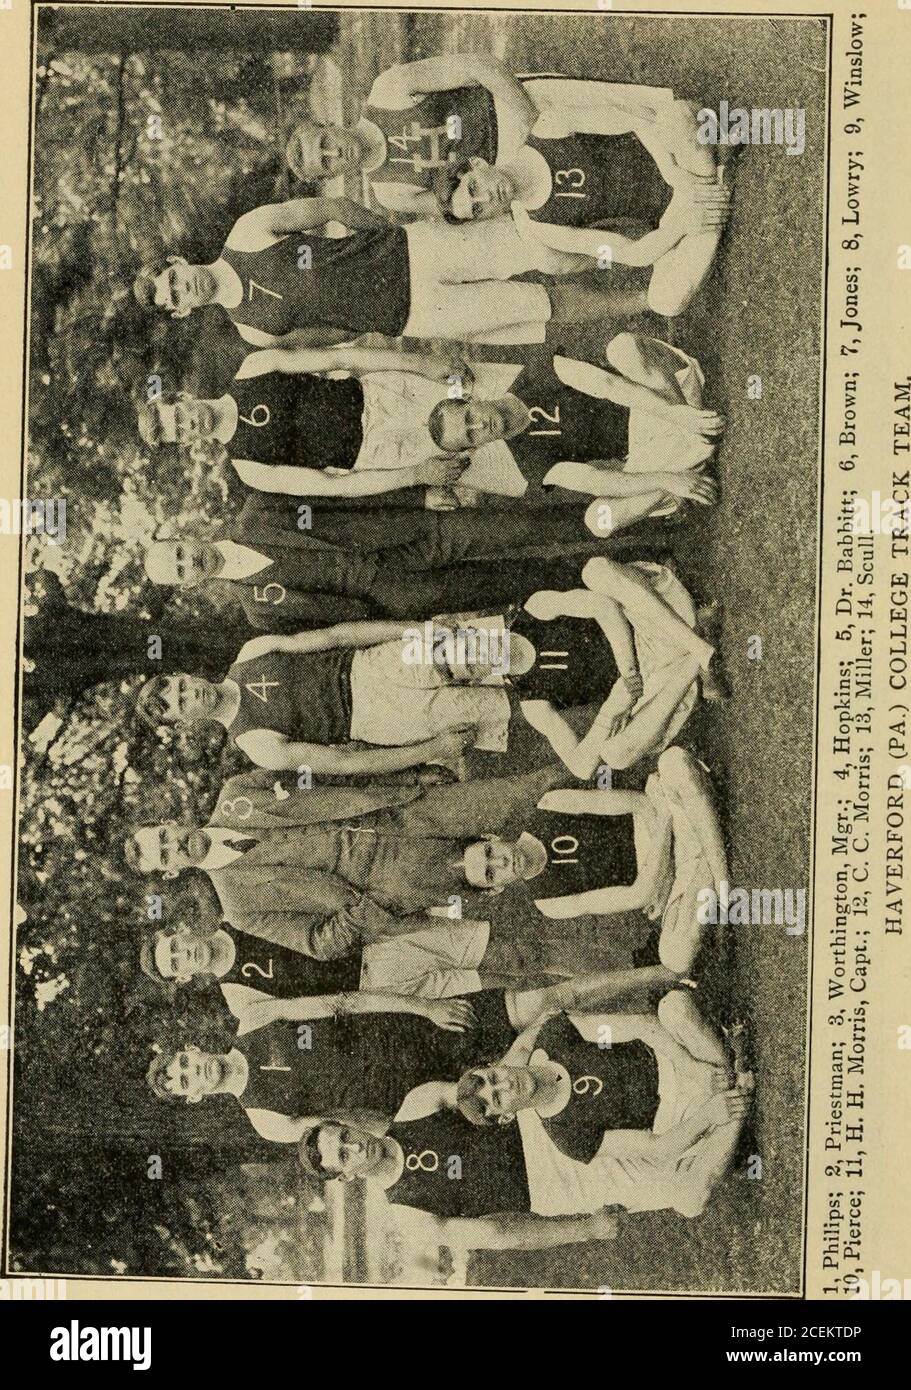 . Spalding's official athletic almanac. Wells, Amherst, 4m. 29 4-5s.; 1890, C. O. Wells, Amherst,4m. 35 2-5s.; 1891, F. F. Carr, Harvard, 4m. 34 2-5s.; 1892, G. Lowell,Harvard, 4m. 33 2-5s.; 1893, G. O. Jarvis, Wesleyan, 4m. 34 3-5s.; 1894,G. 0. Jarvis, Wesleyan, 4m. 26 4-5s.; 1895, G. W. Orton, Pennsylvania,4m. 23 2-5S.; 1896, G. O. Jarvis, Wesleyan, 4m. 28 4-5s.; 1897, G. W.Orton, Pennsylvania, 4m. 25s.; 1898, J. F. Cregan, Princeton, 4m. 23 3-5s.;1899, J. F. Cregan, Princeton, 4m. 25 l-5s.; 1900, J. F. Cregan, Princeton,4m. 24 2-5S.; 1901, H. B. Clark, Harvard, 4m. 31 l-5s.; 1902, R. E. Wil Stock Photo